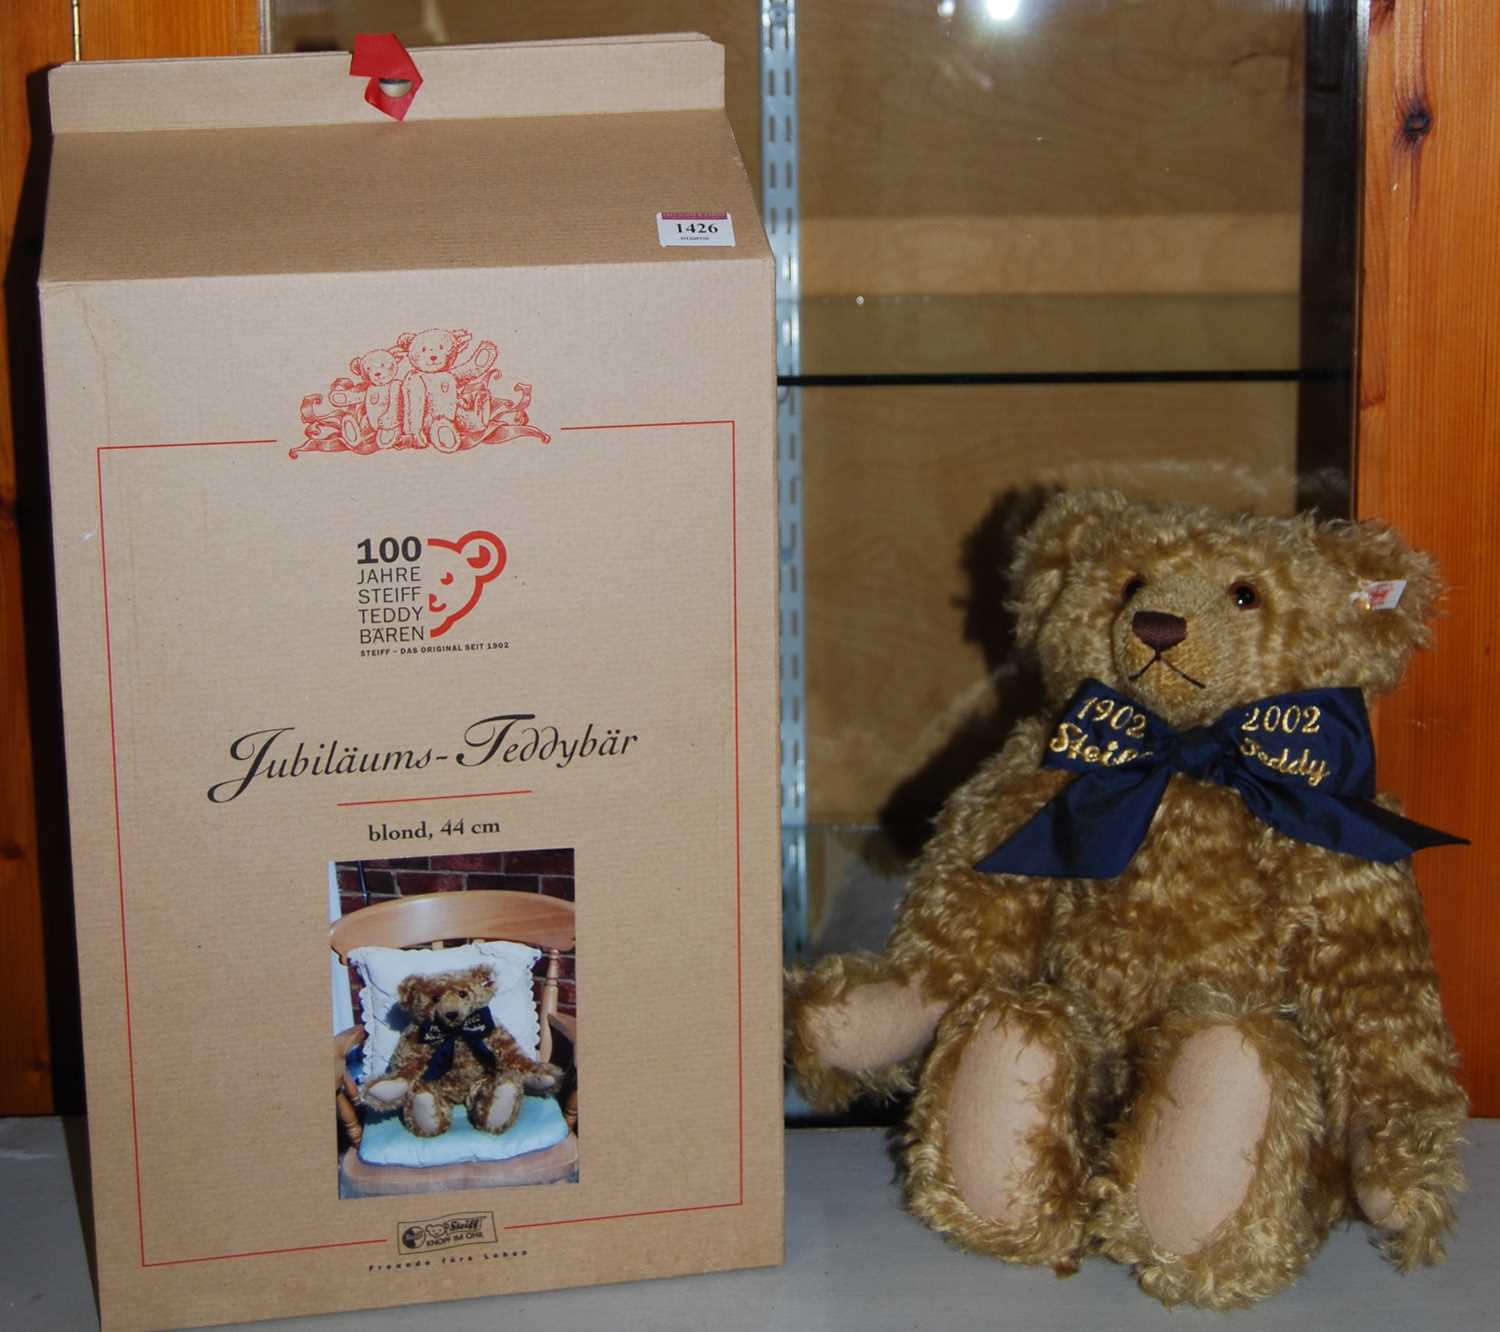 A boxed Steiff 'as-new' Jubilaums-Teddybar bear, blond, 44cm, serial number 670985, with white tag